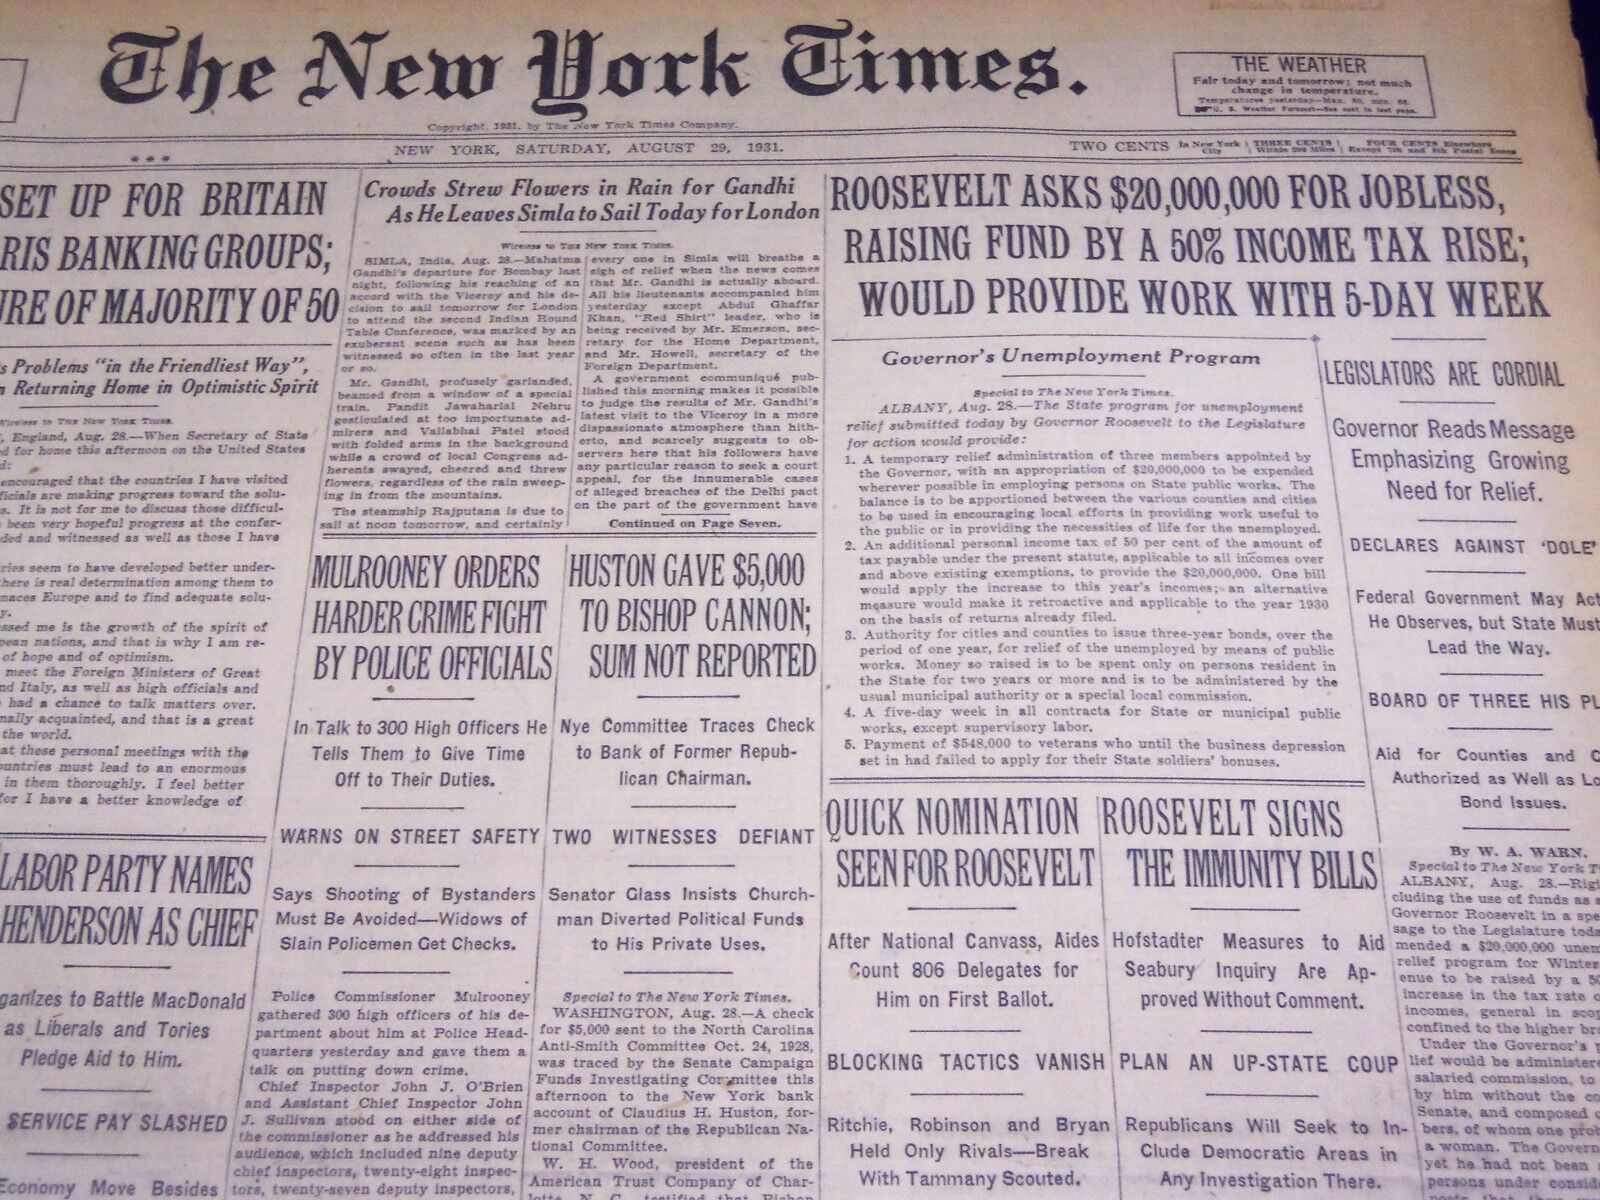 1931 AUGUST 29 NEW YORK TIMES - ROOSEVELT ASKS $20,000,000 FOR JOBLESS - NT 2435